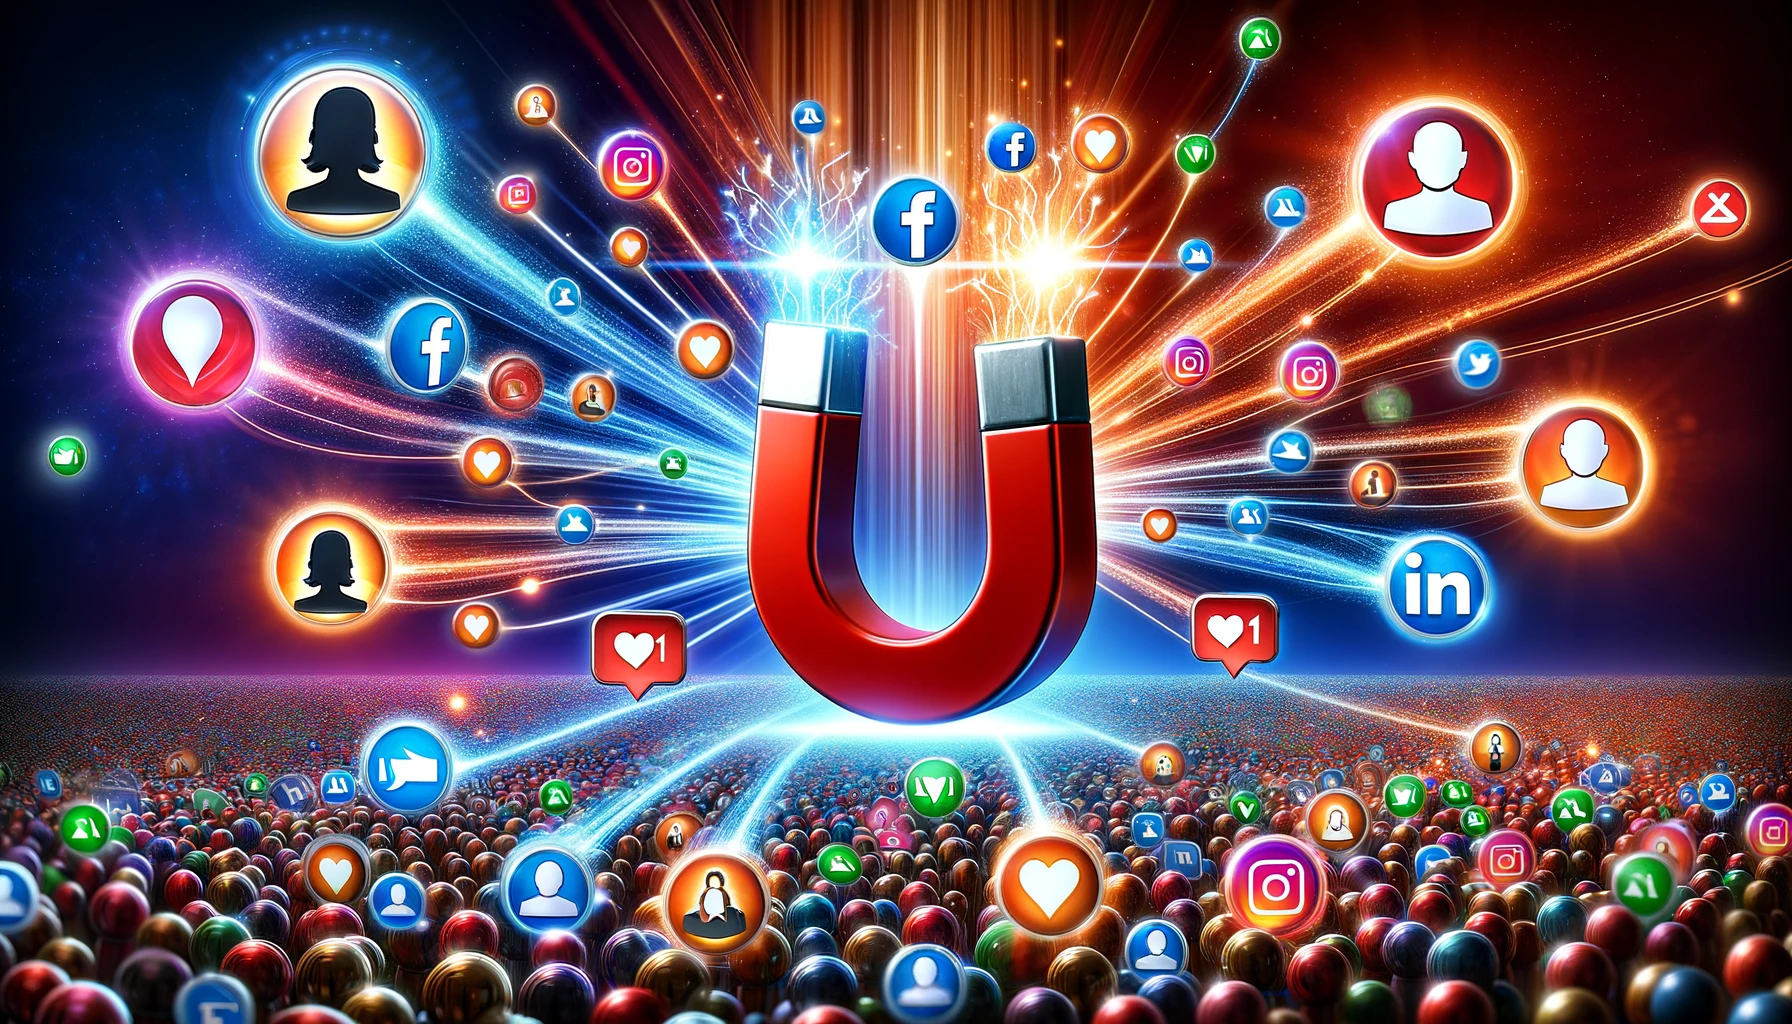 Dynamic visualization of social media platforms interconnected with streams of light, with a digital magnet attracting user avatars, symbolizing effective strategies in generating social media leads.